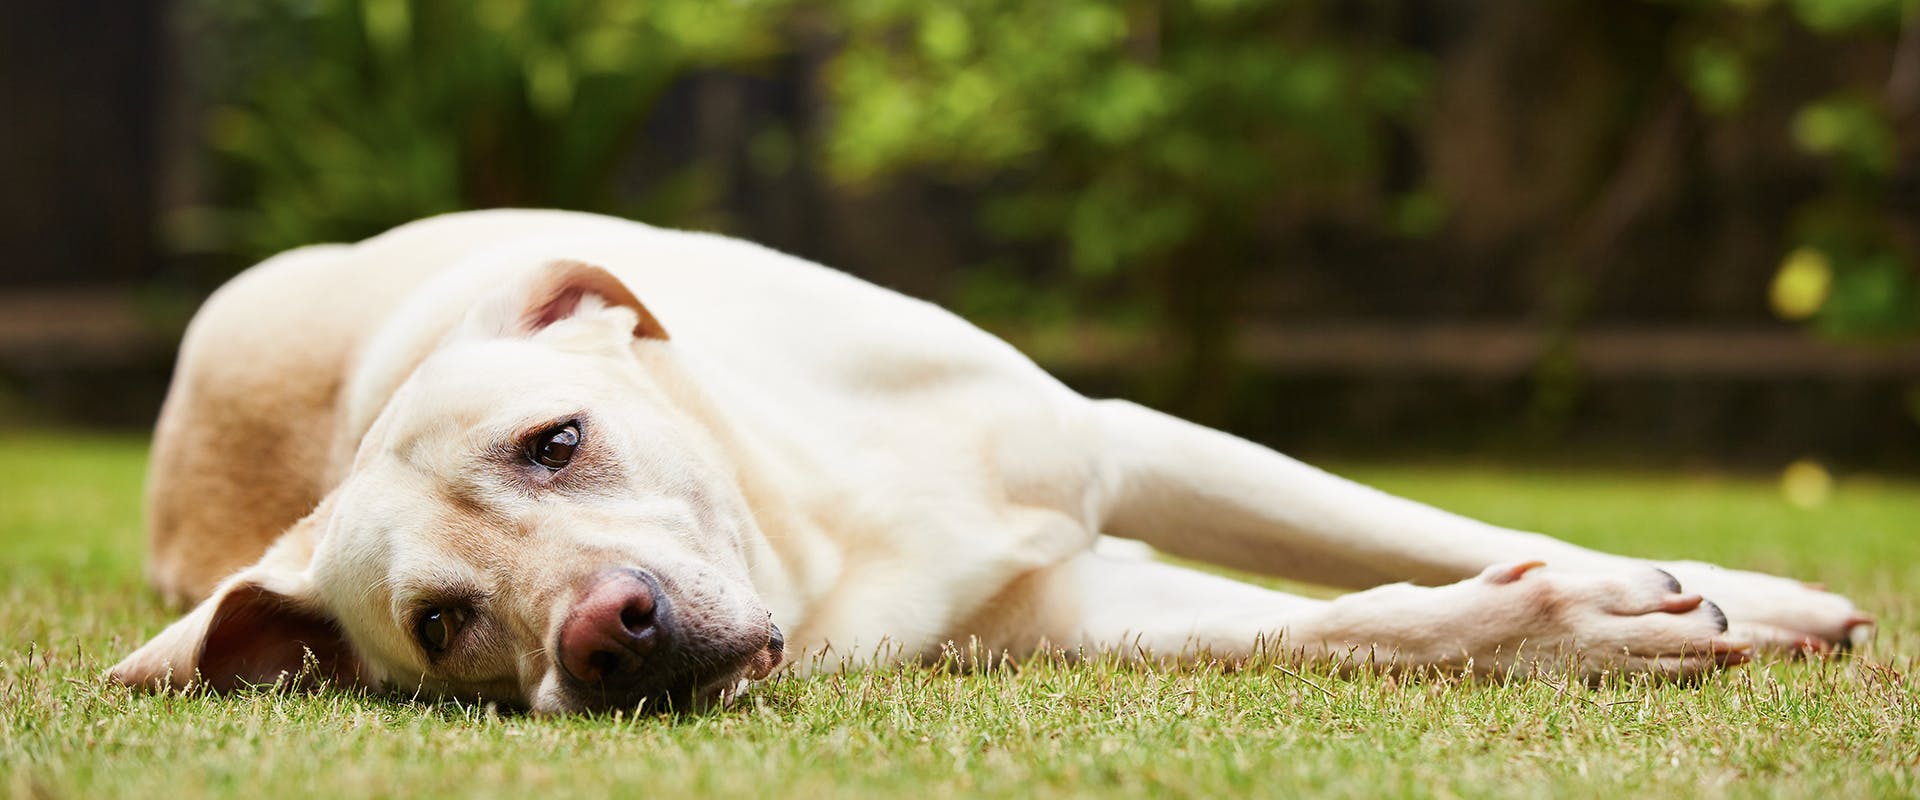 A sad looking dog laying on grass